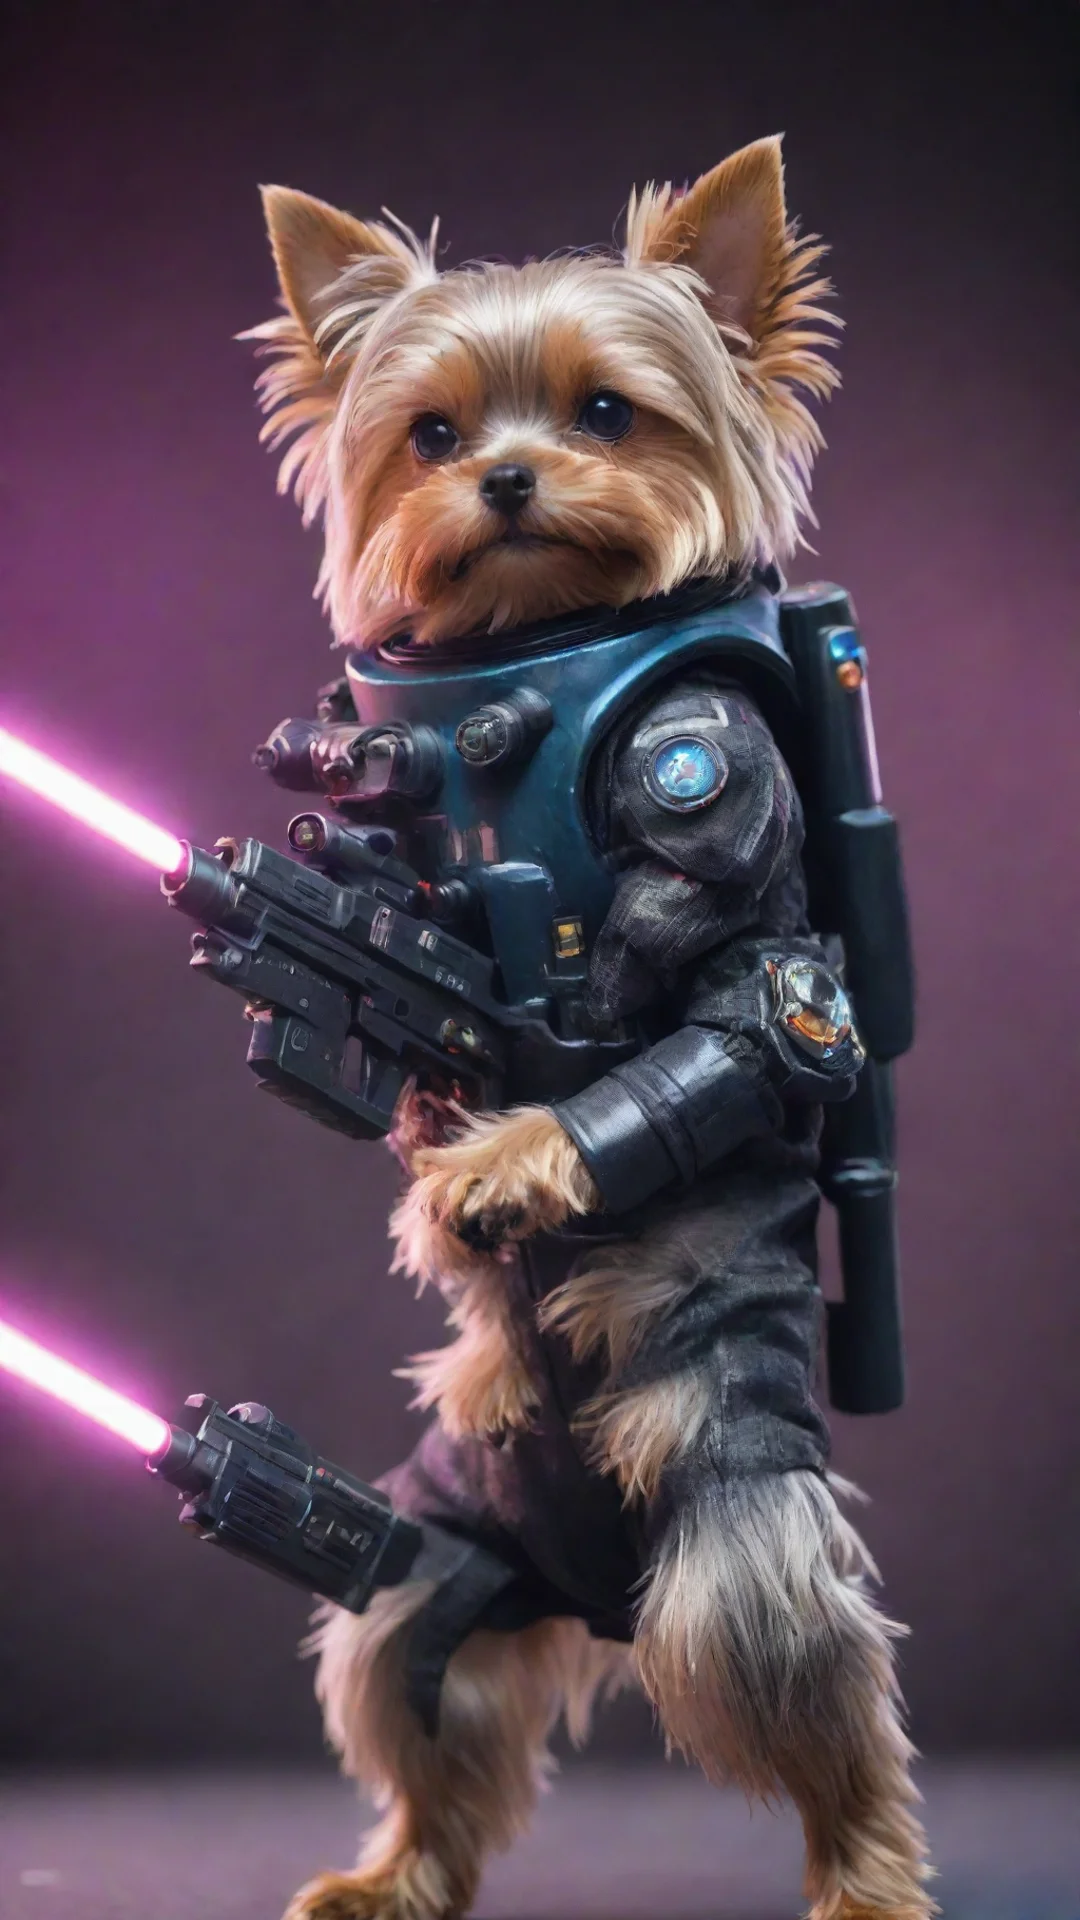 aiamazing yorkshire terrier in a cyberpunk space suit firing a laser gun awesome portrait 2 tall